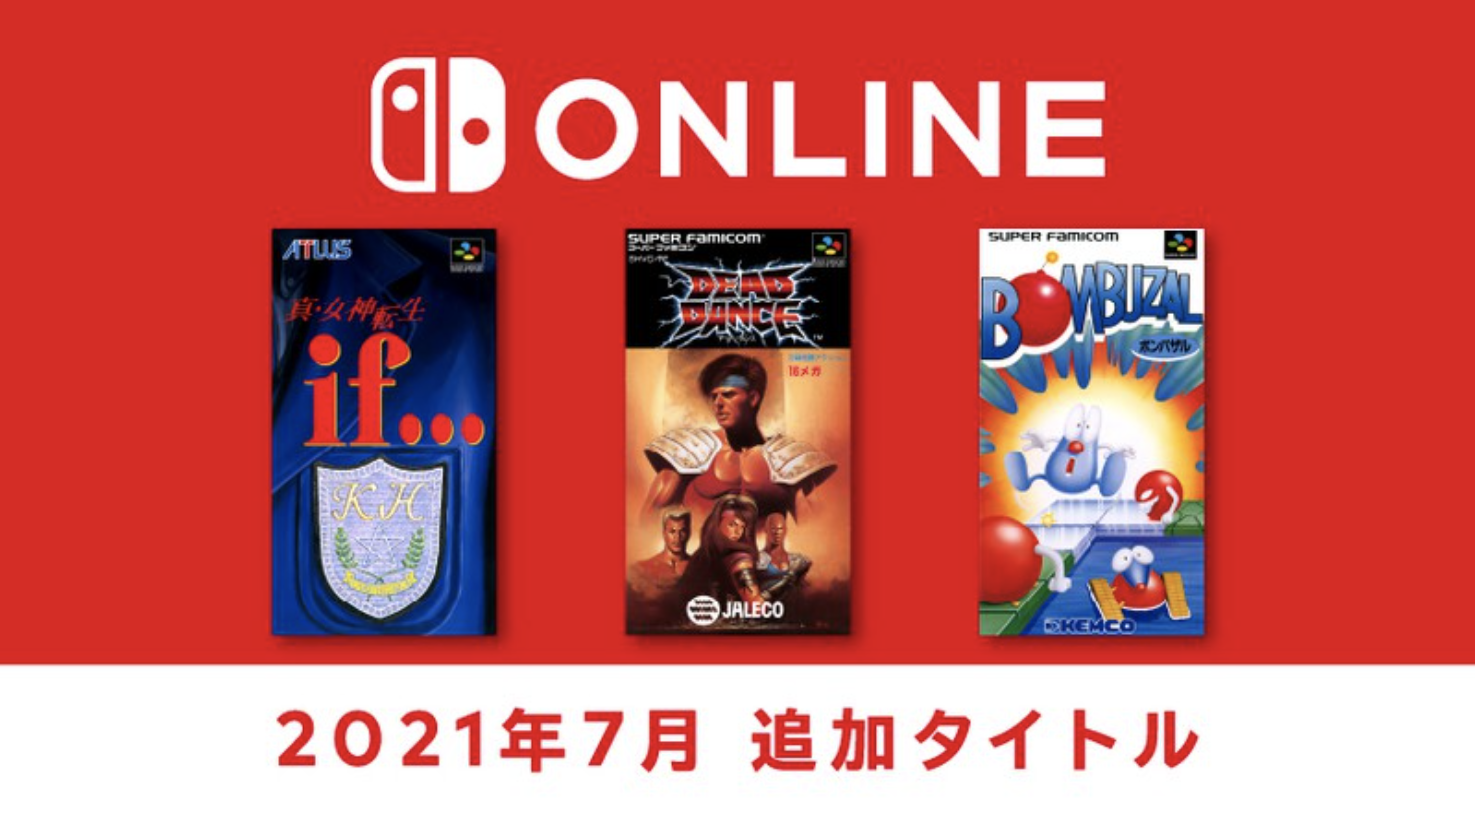 Three New Super Famicom Games Coming to NSO Next Week